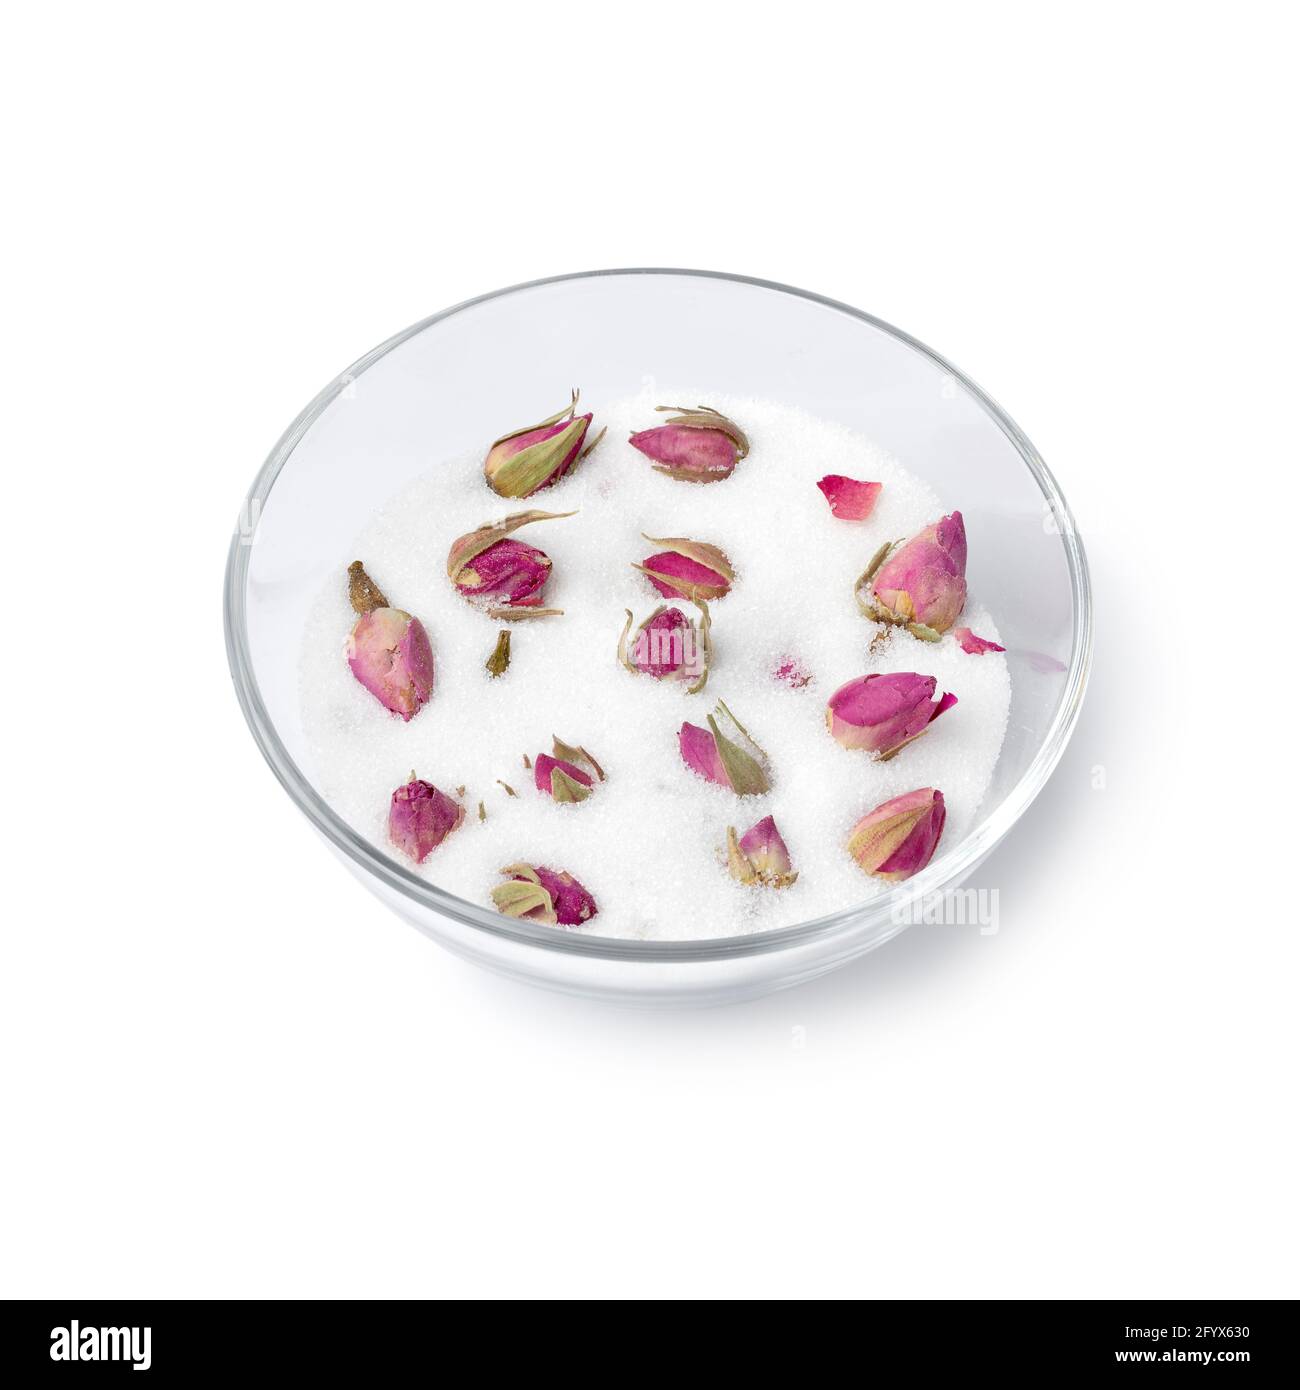 Dried rose buds in a glass cup with white sugar to obtain the rose taste and odor isolated on white background Stock Photo